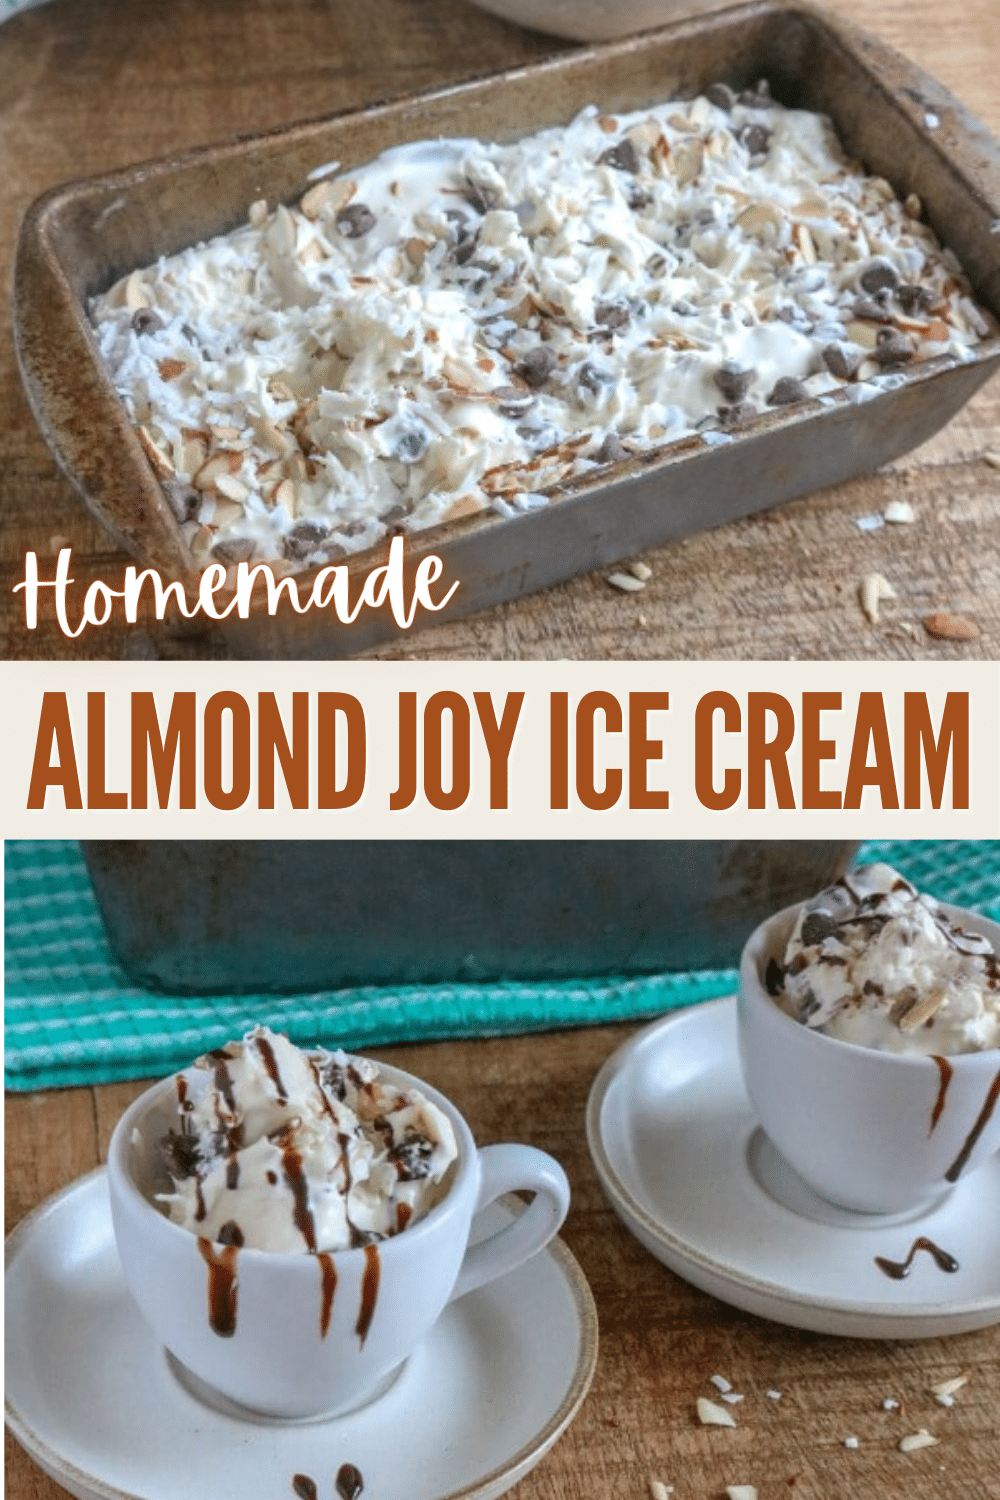 This Easy Homemade Almond Joy Ice Cream recipe is a delicious combination of two desserts. It's perfect for anyone who loves Almond Joy and ice cream! #almondjoy #icecream #dessert via @wondermomwannab